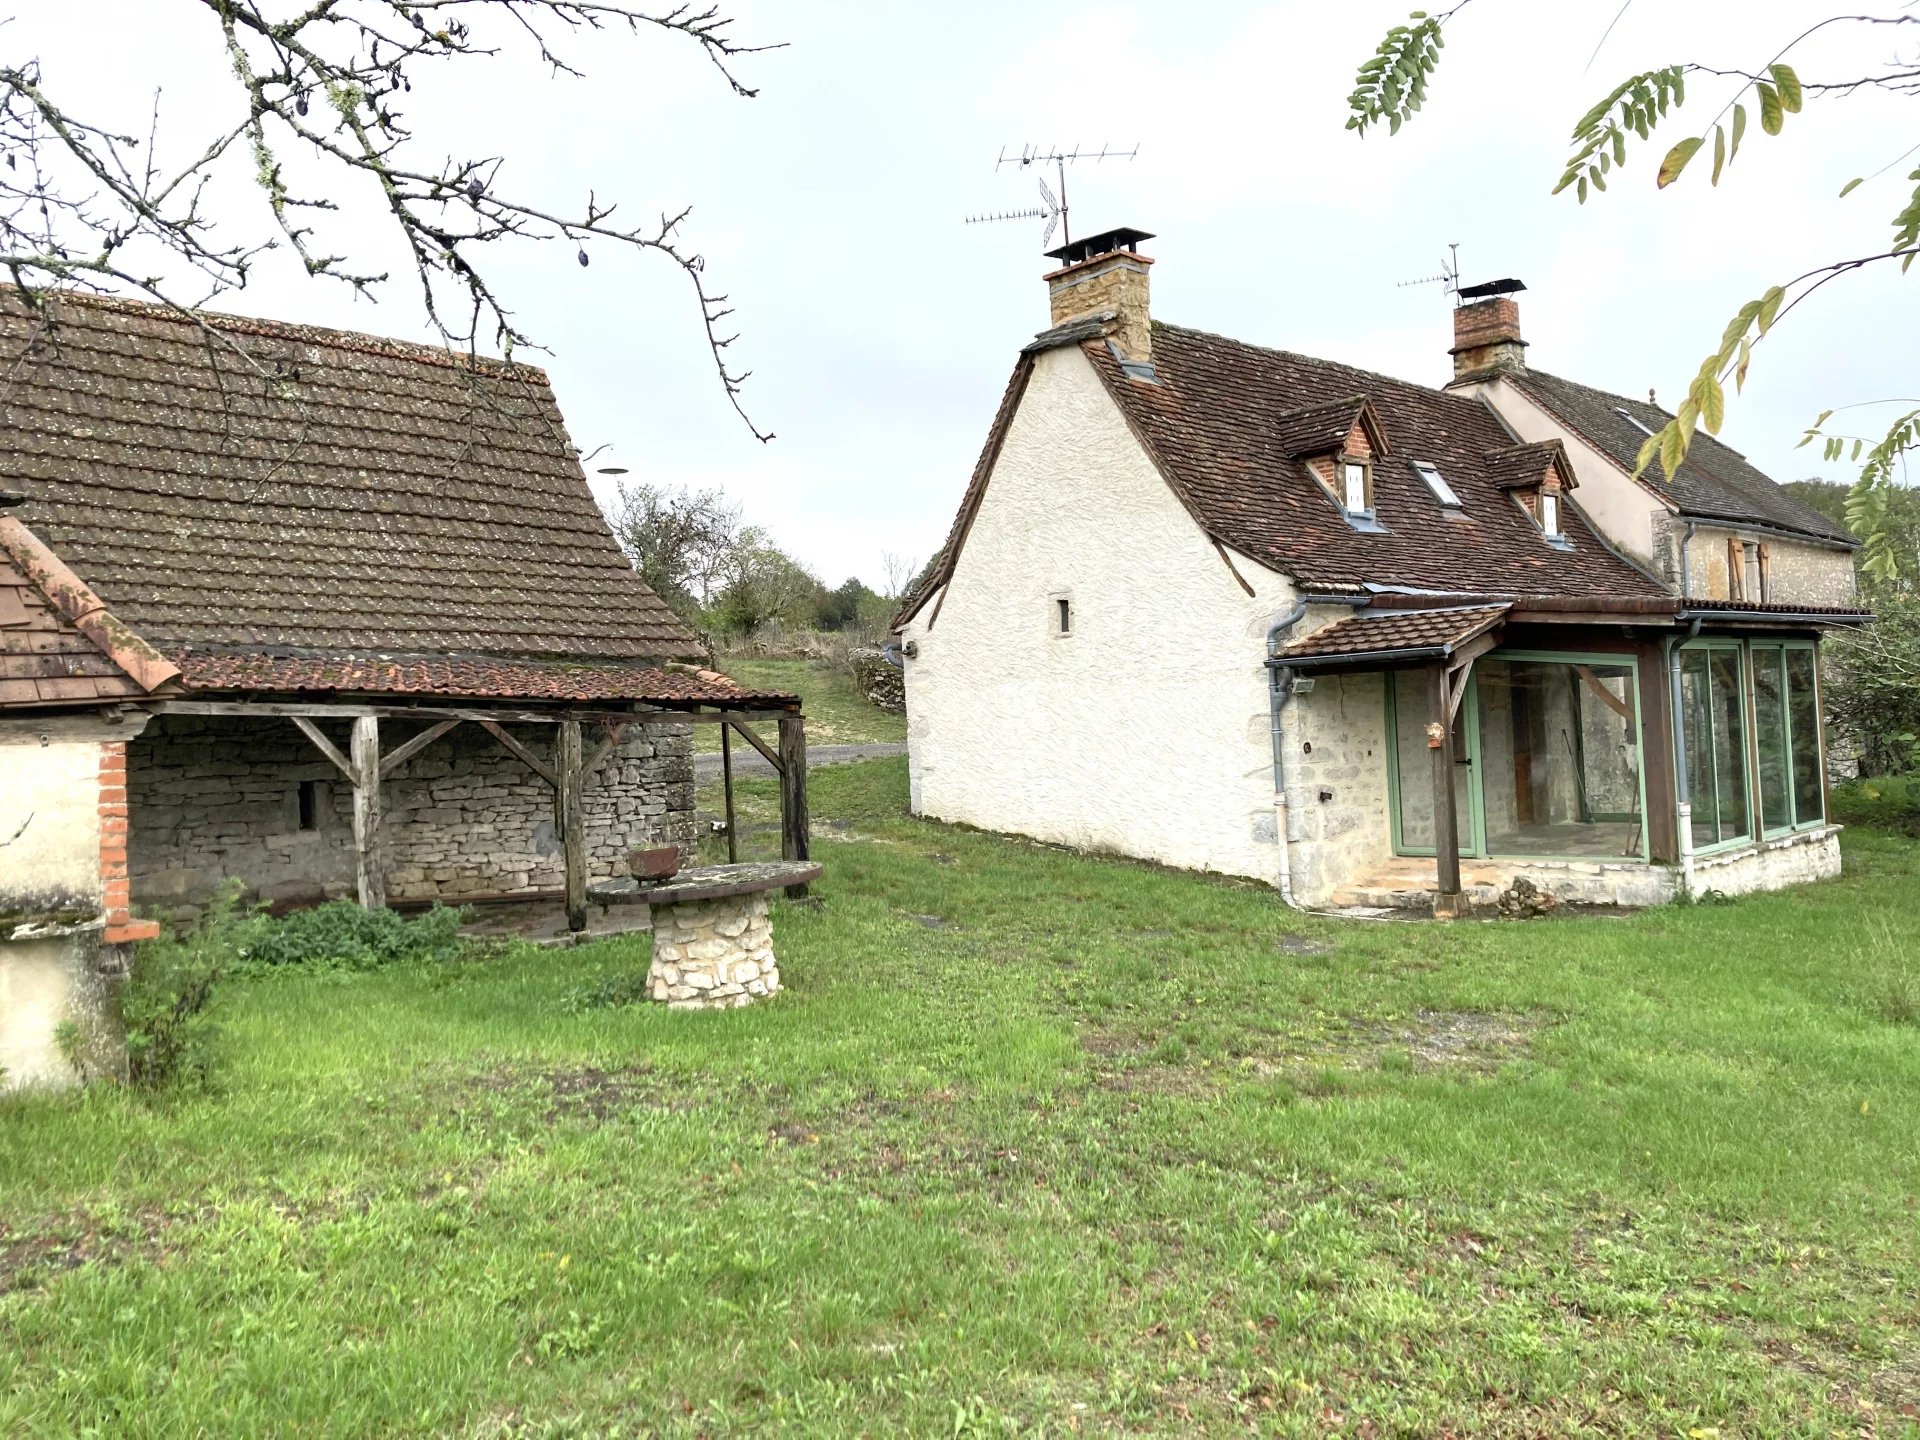 Former farm to renovate in the heart of the Braunhie forest